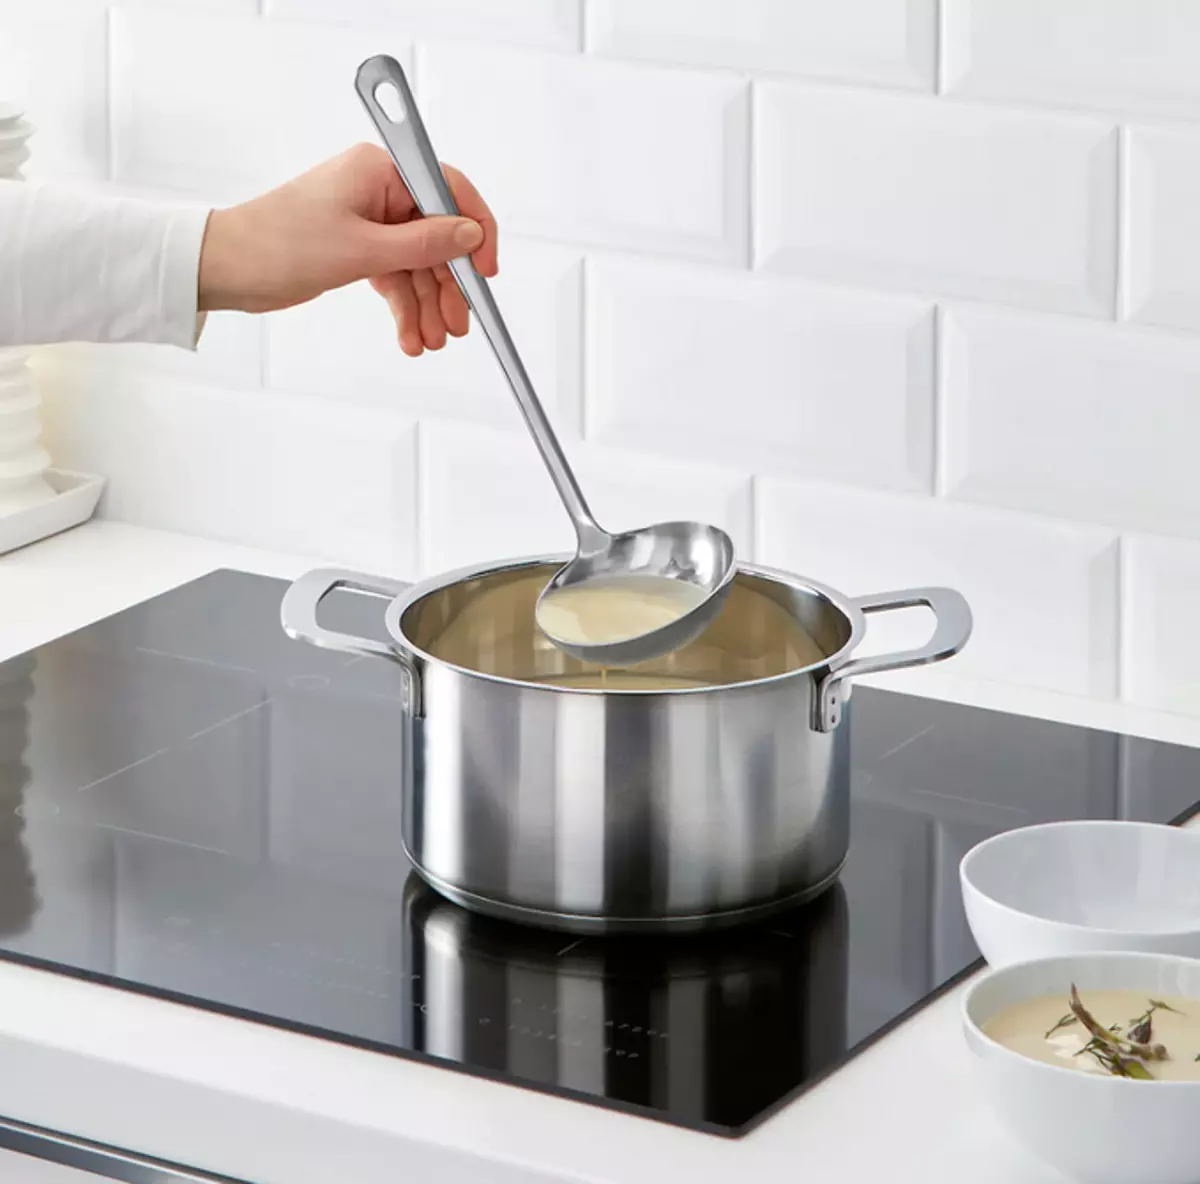 9 products for kitchen from Ikea, which will make your interior visually more expensive 6289_33